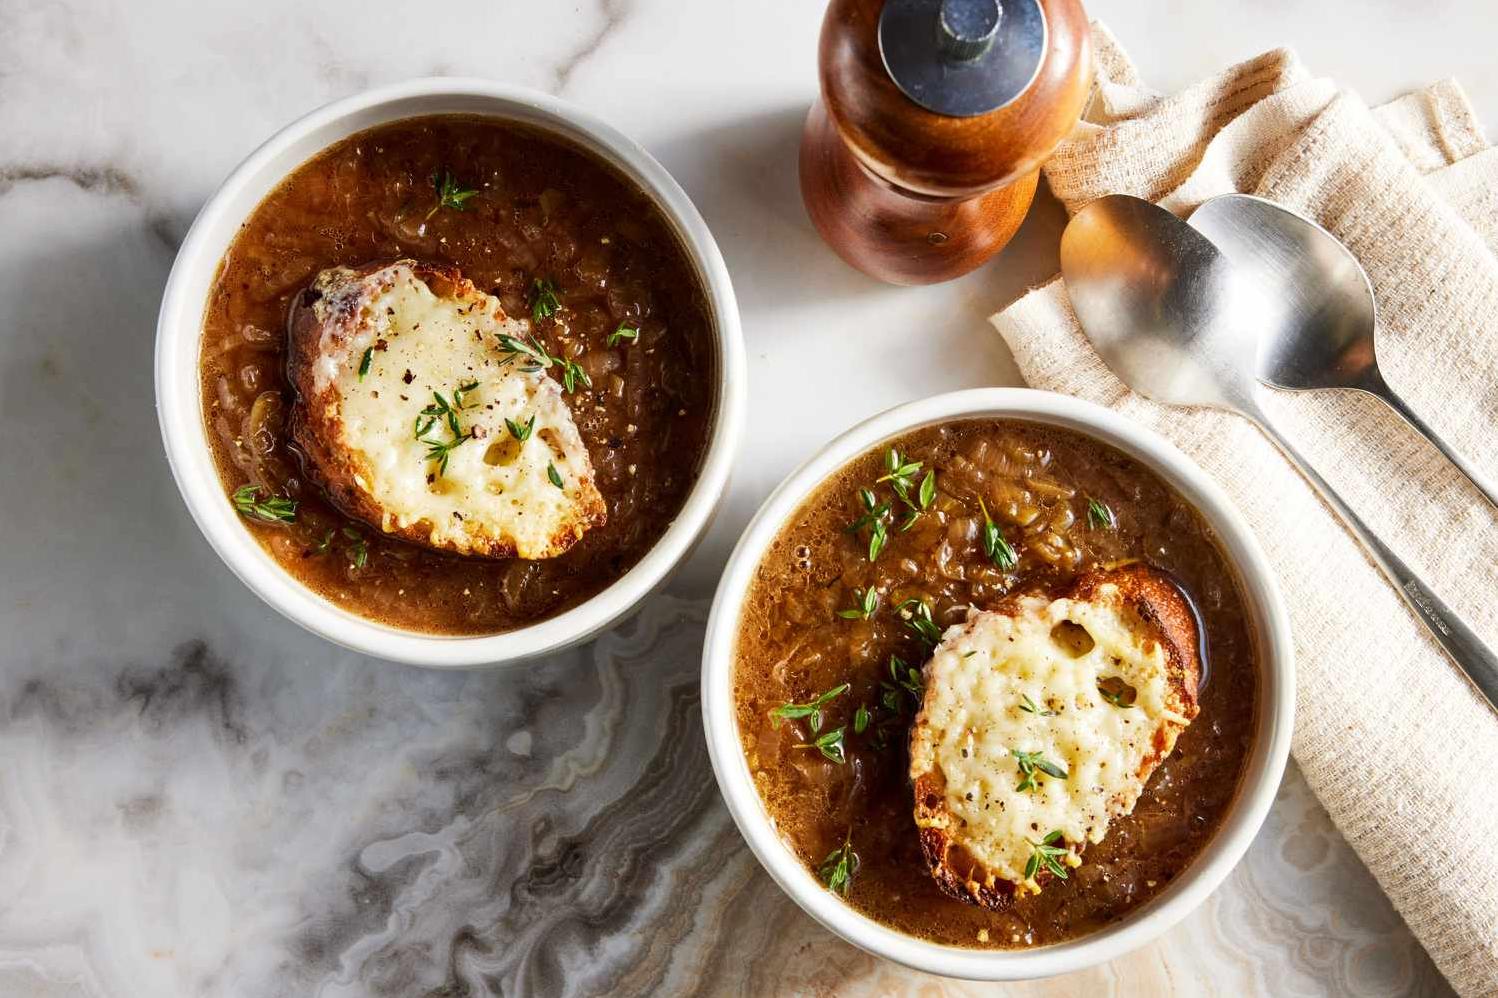  This soup is comfort in a bowl.